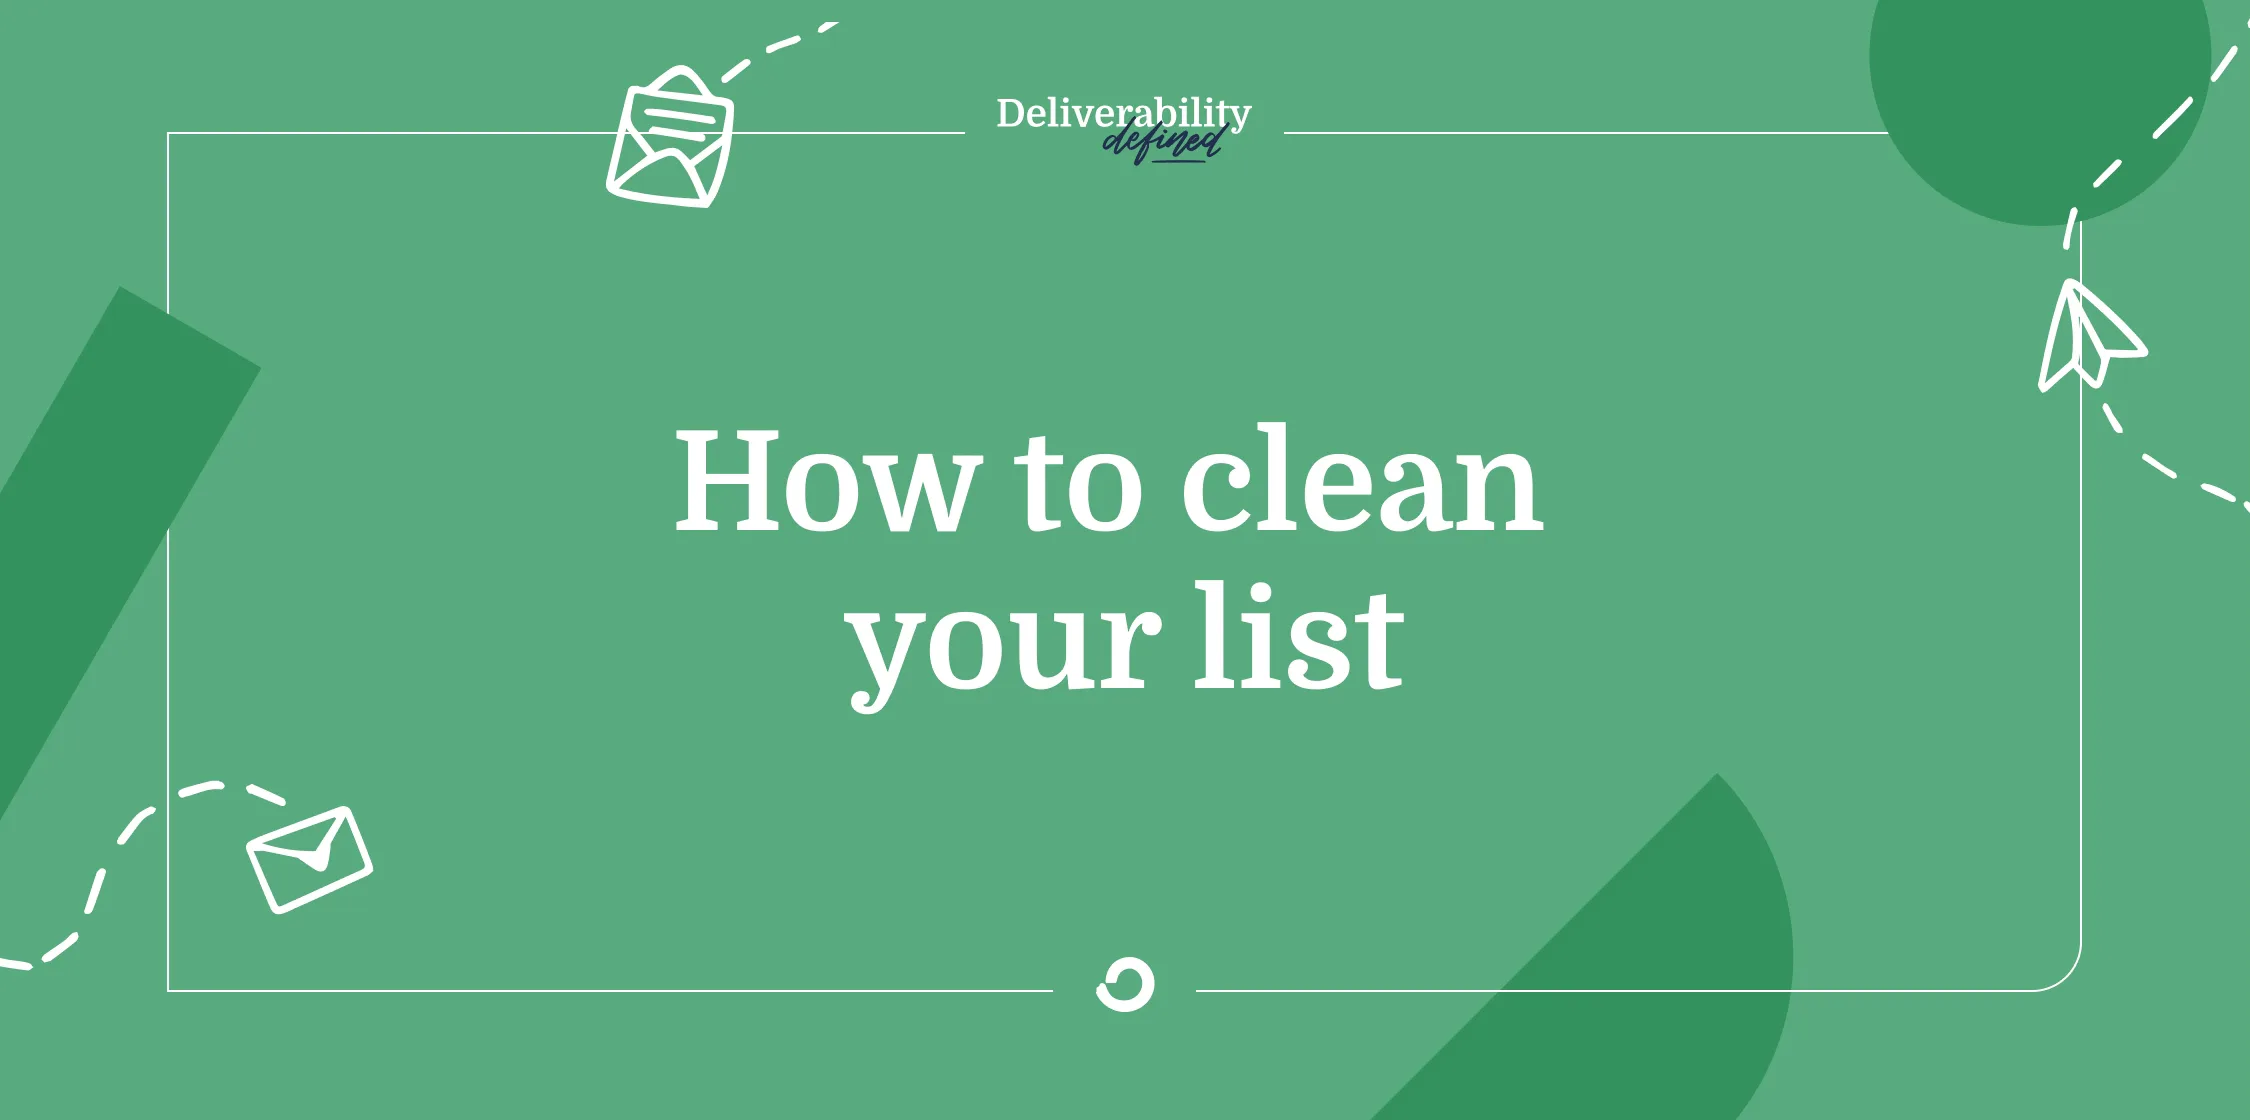 How to clean your list